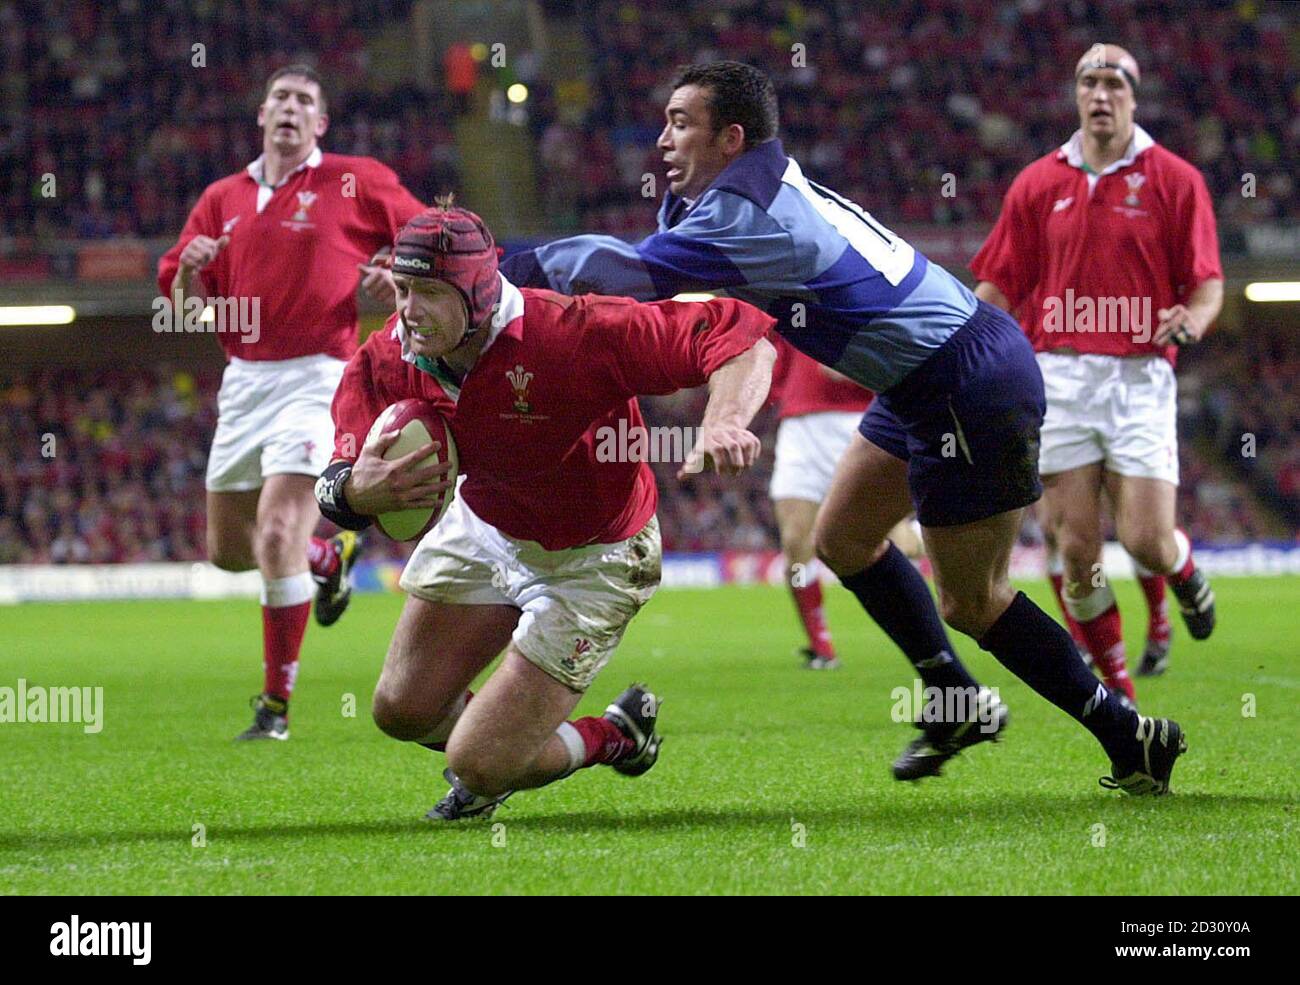 Wales' Ian Gough scores a try despite the attentions of French Barbarian Filipo Toala, during their Rugby match at the Millennium Stadium, Cardiff. Stock Photo